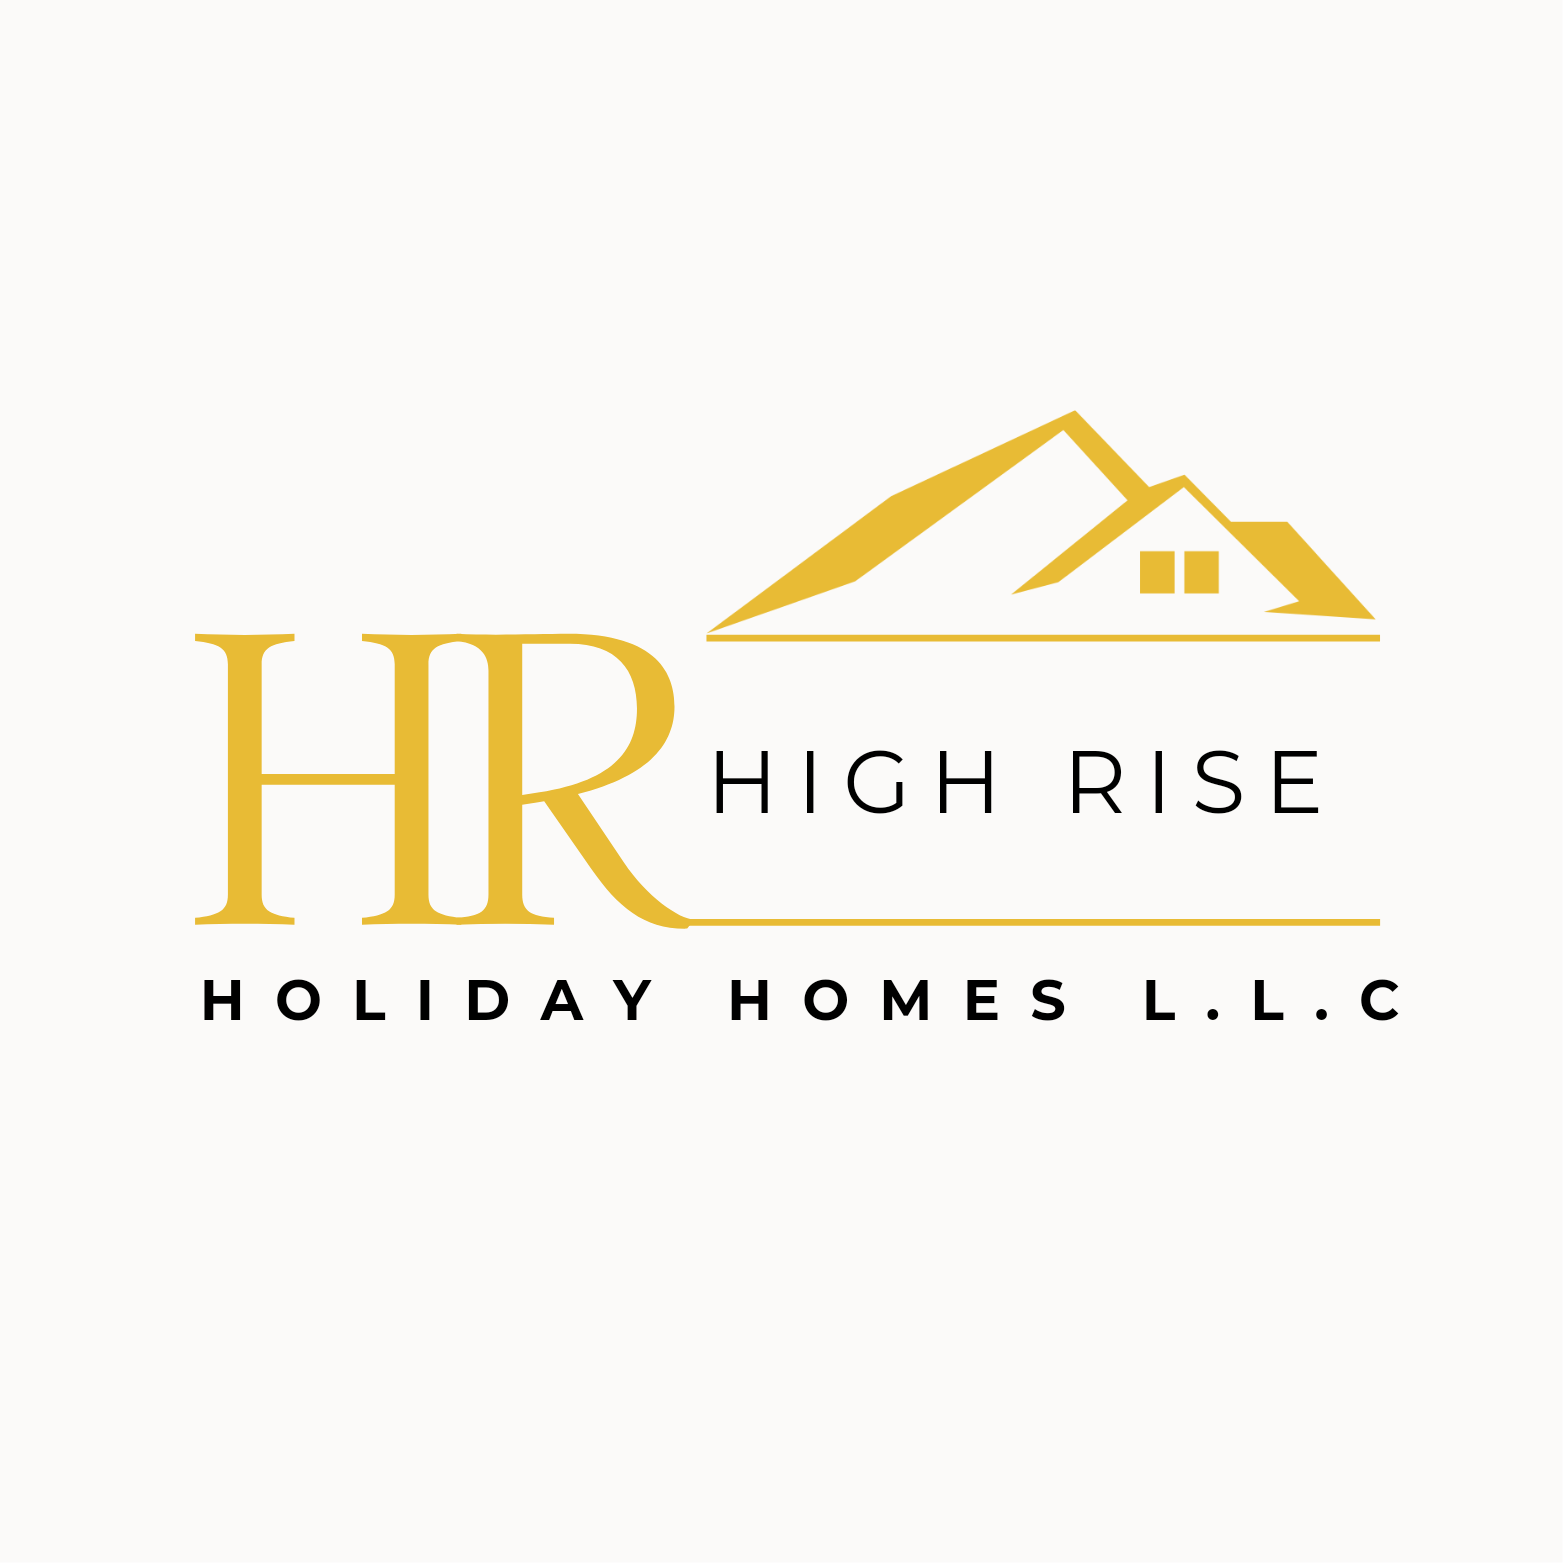 High Rise Holiday Homes